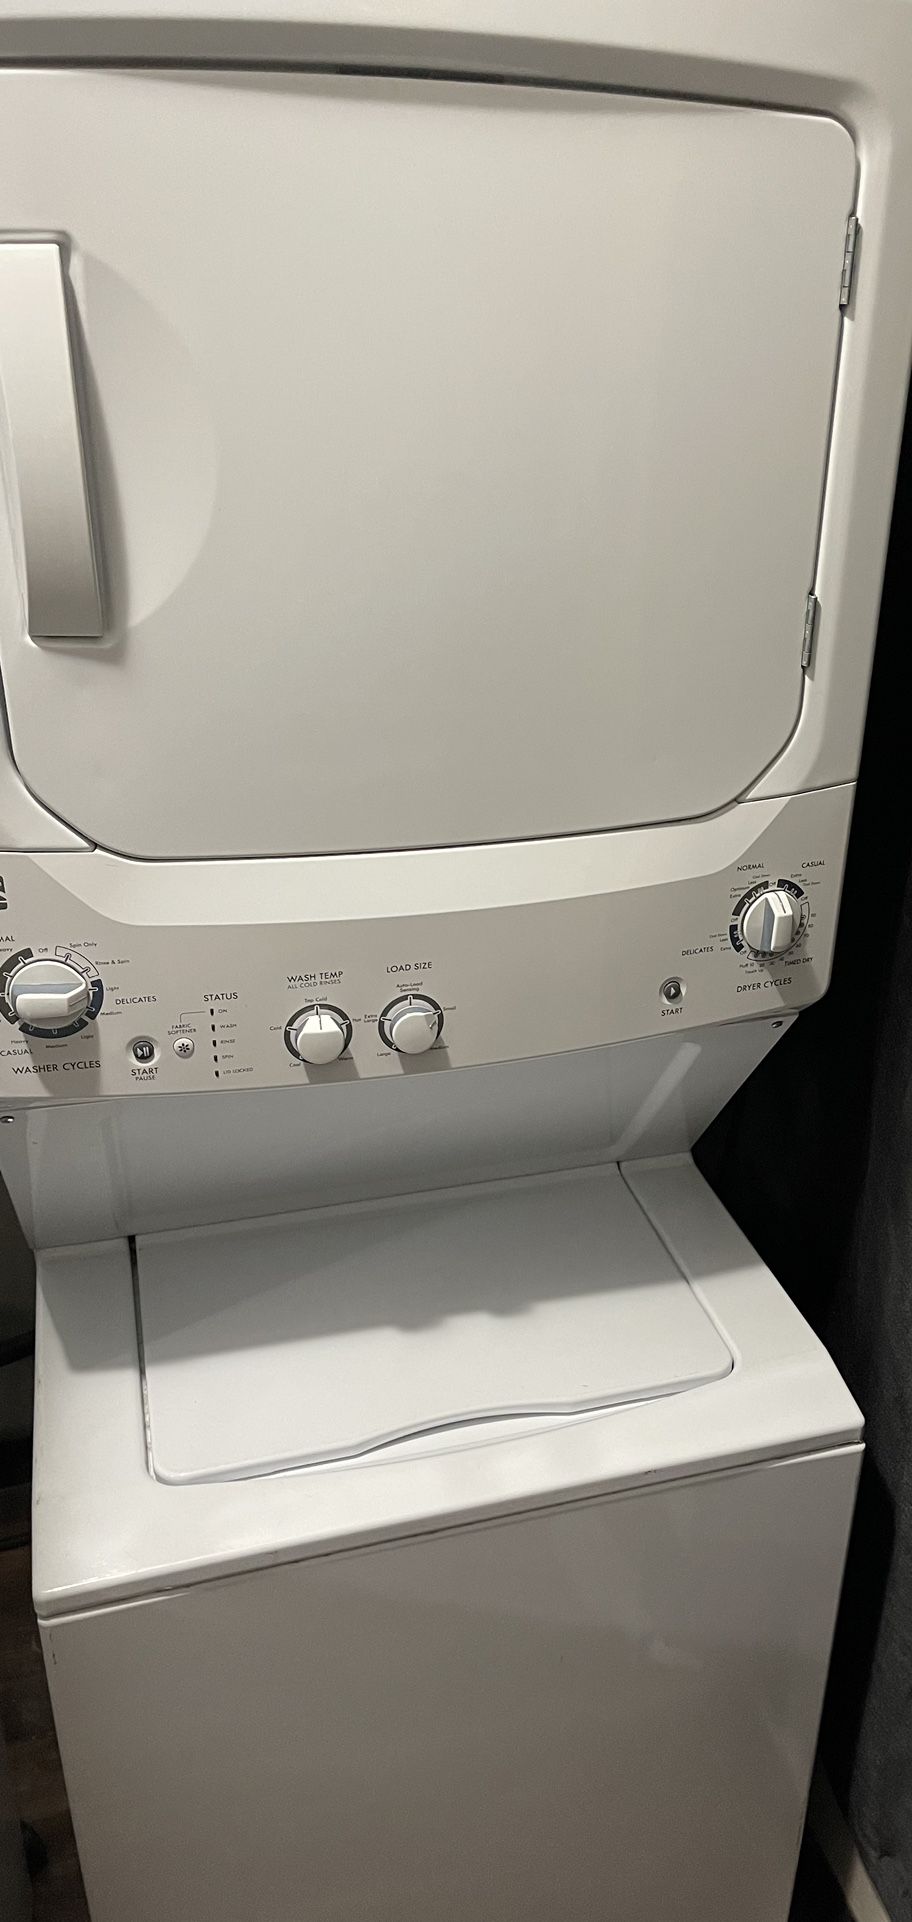 washer dryer combo 